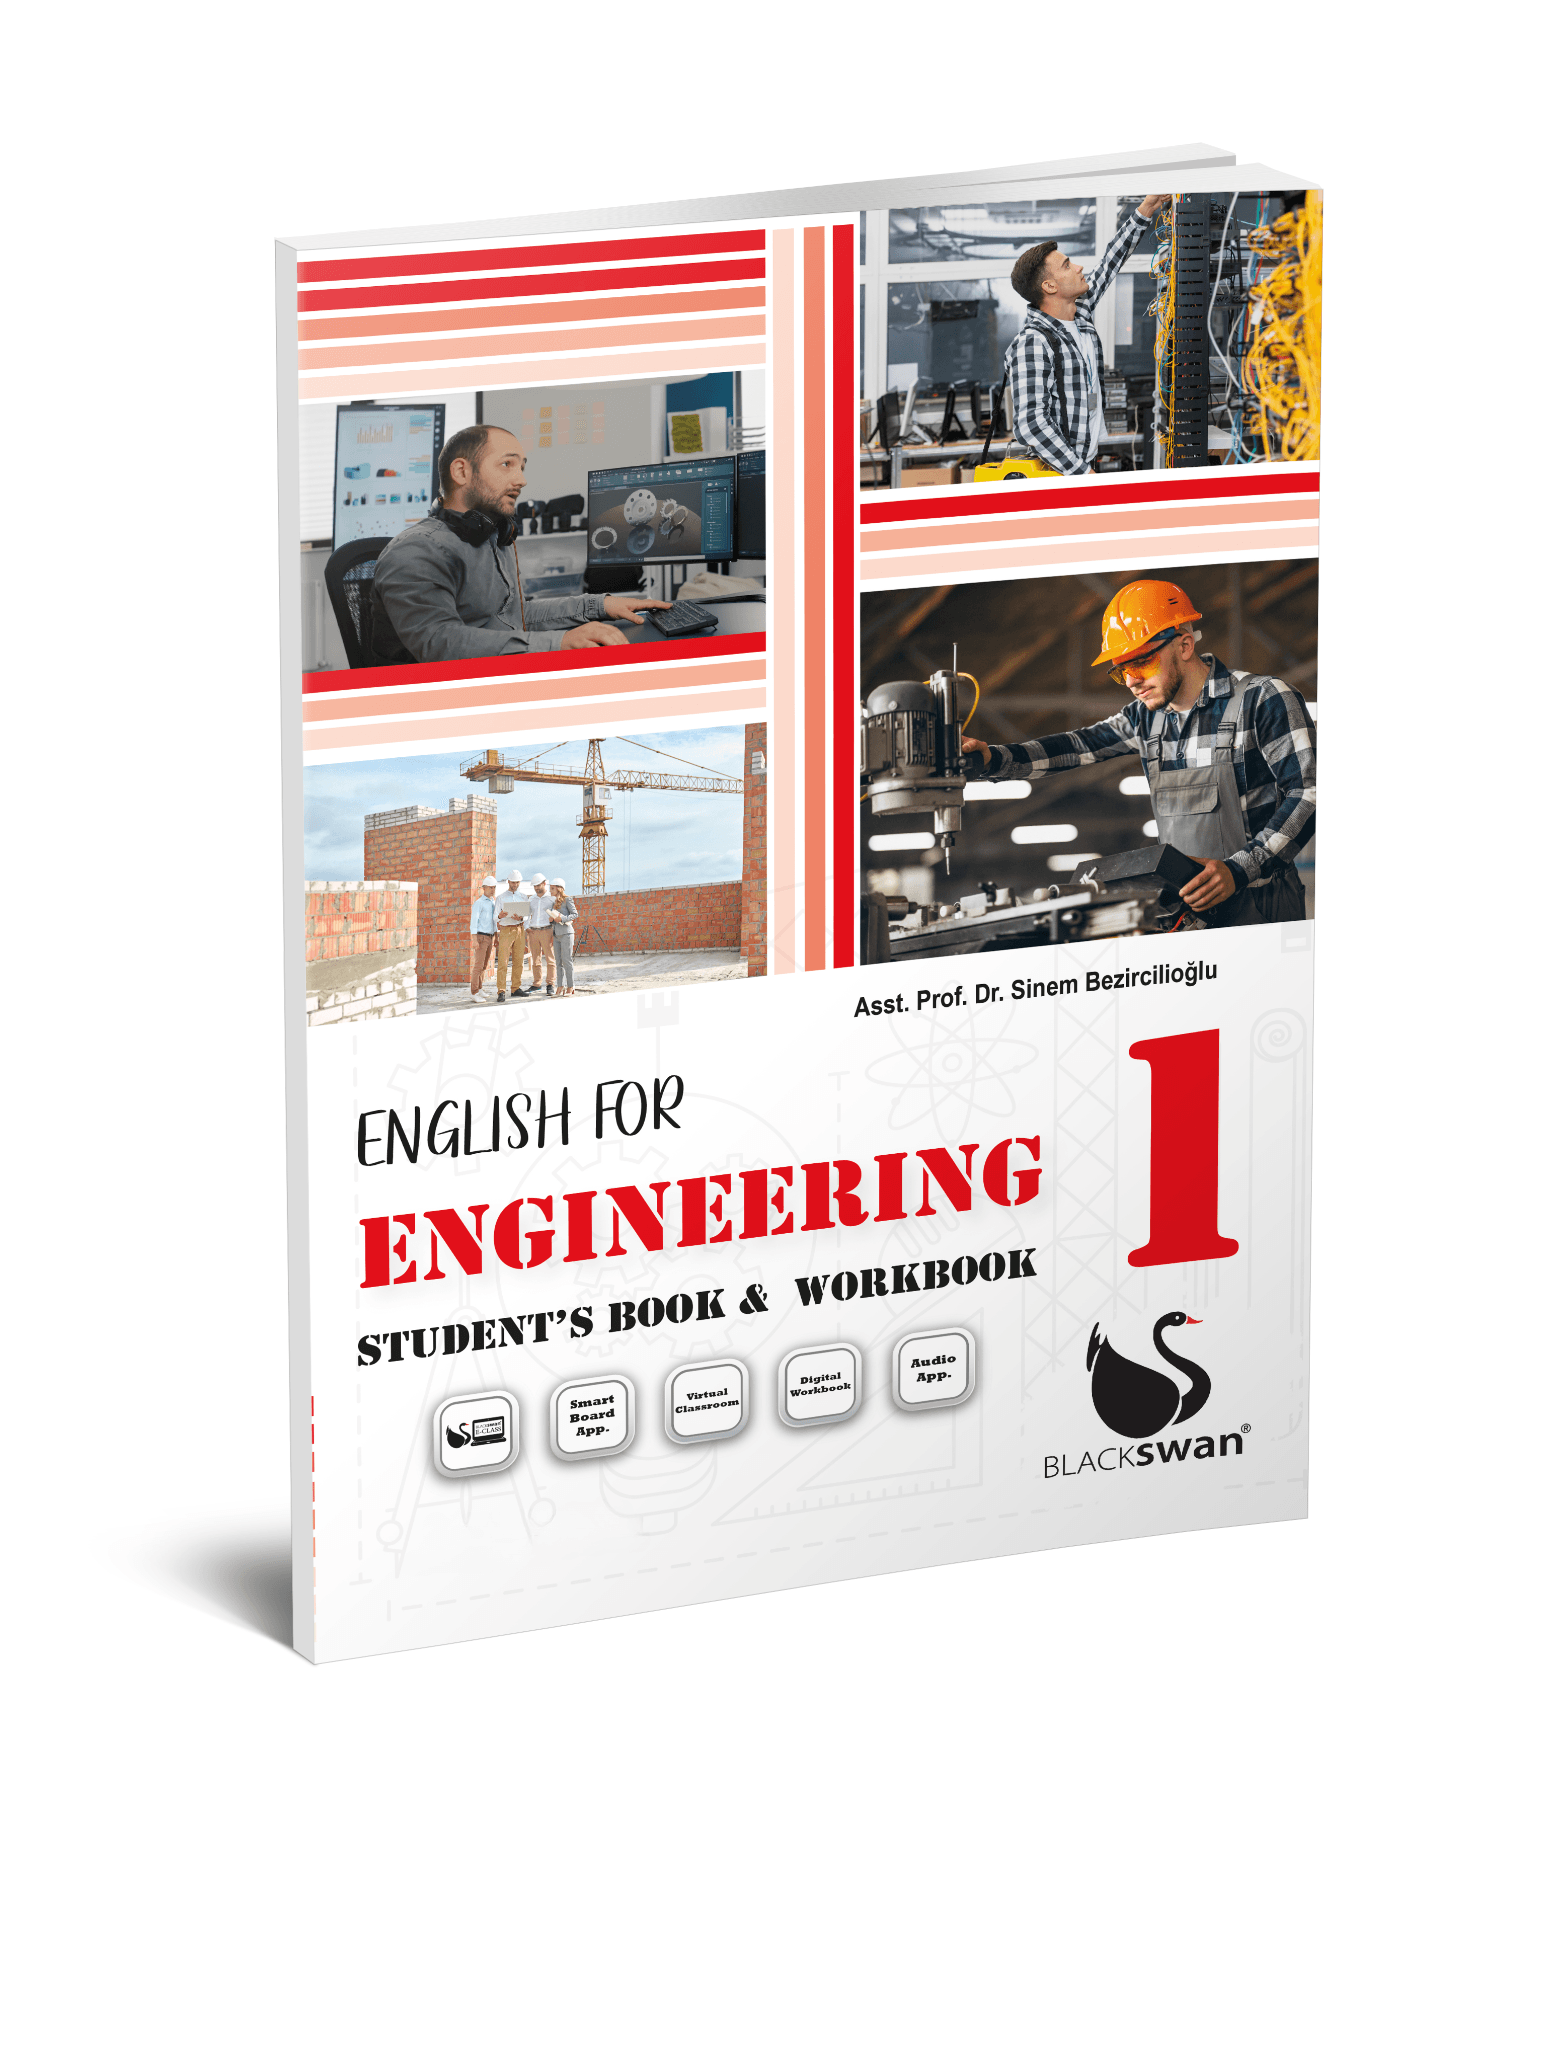 English for Engineering 1 Student's Book & Workbook